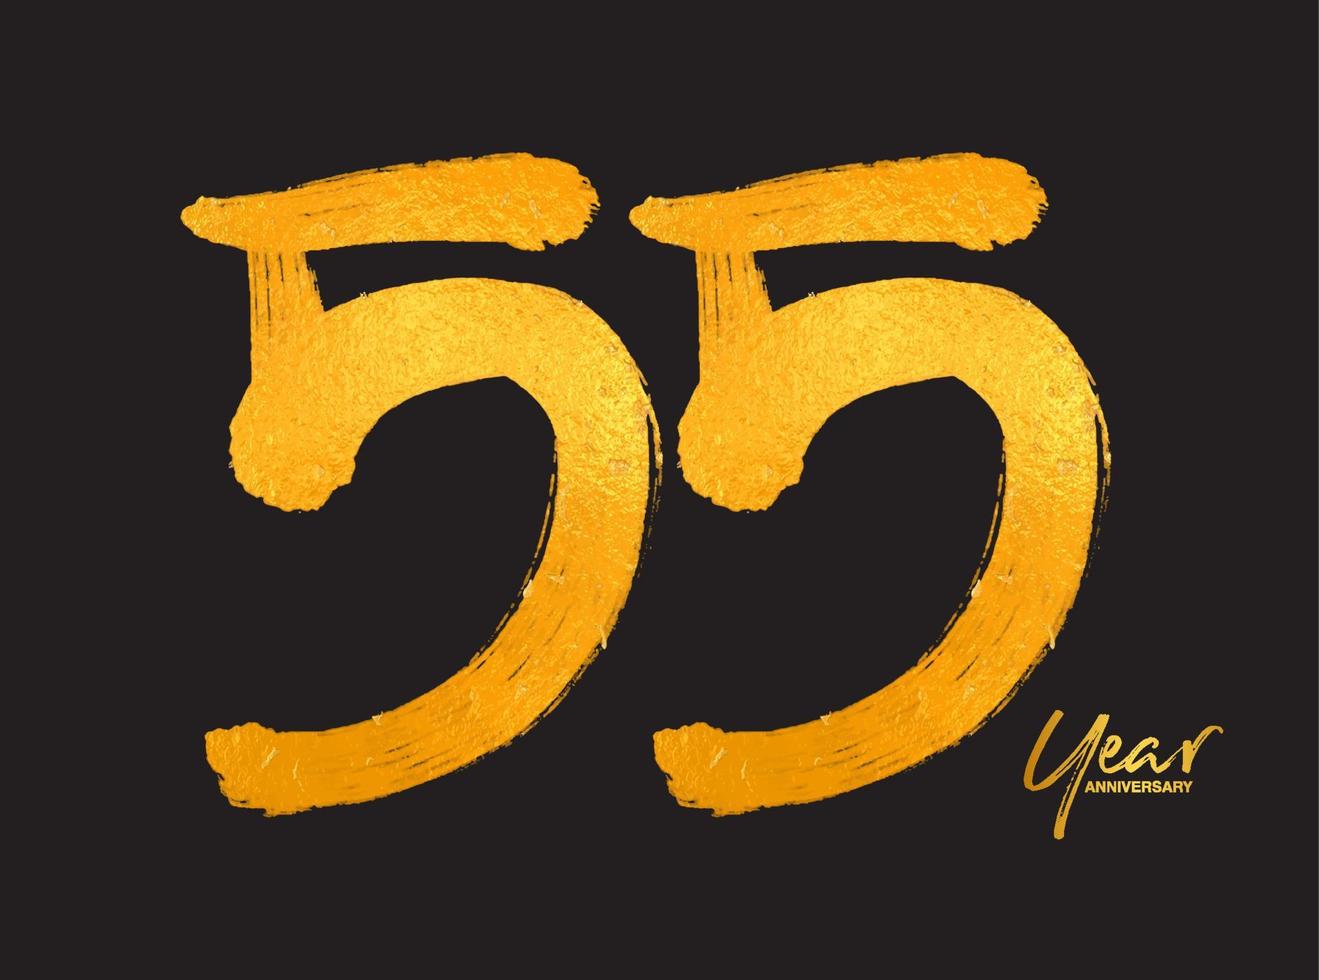 Gold 55 Years Anniversary Celebration Vector Template, 55 Years  logo design, 55th birthday, Gold Lettering Numbers brush drawing hand drawn sketch, number logo design vector illustration